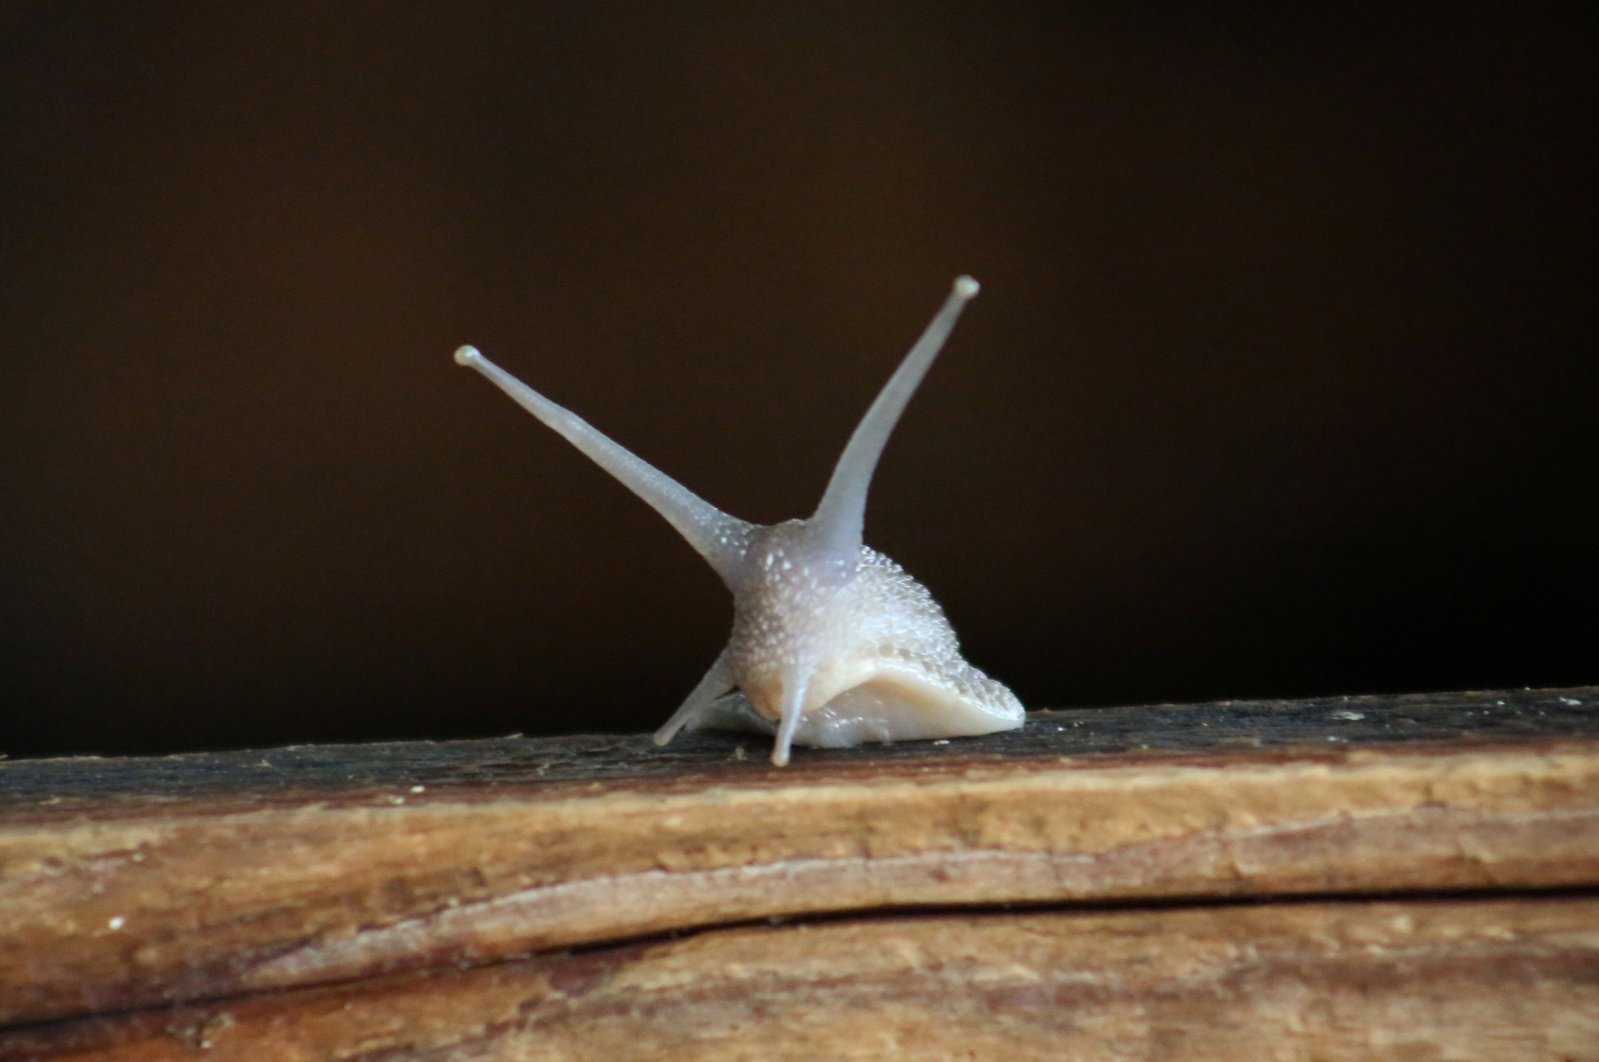 A snail crawls around in a snail shelter in Wahagnies, near Lille, France, May 11, 2021. (Reuters Photo)